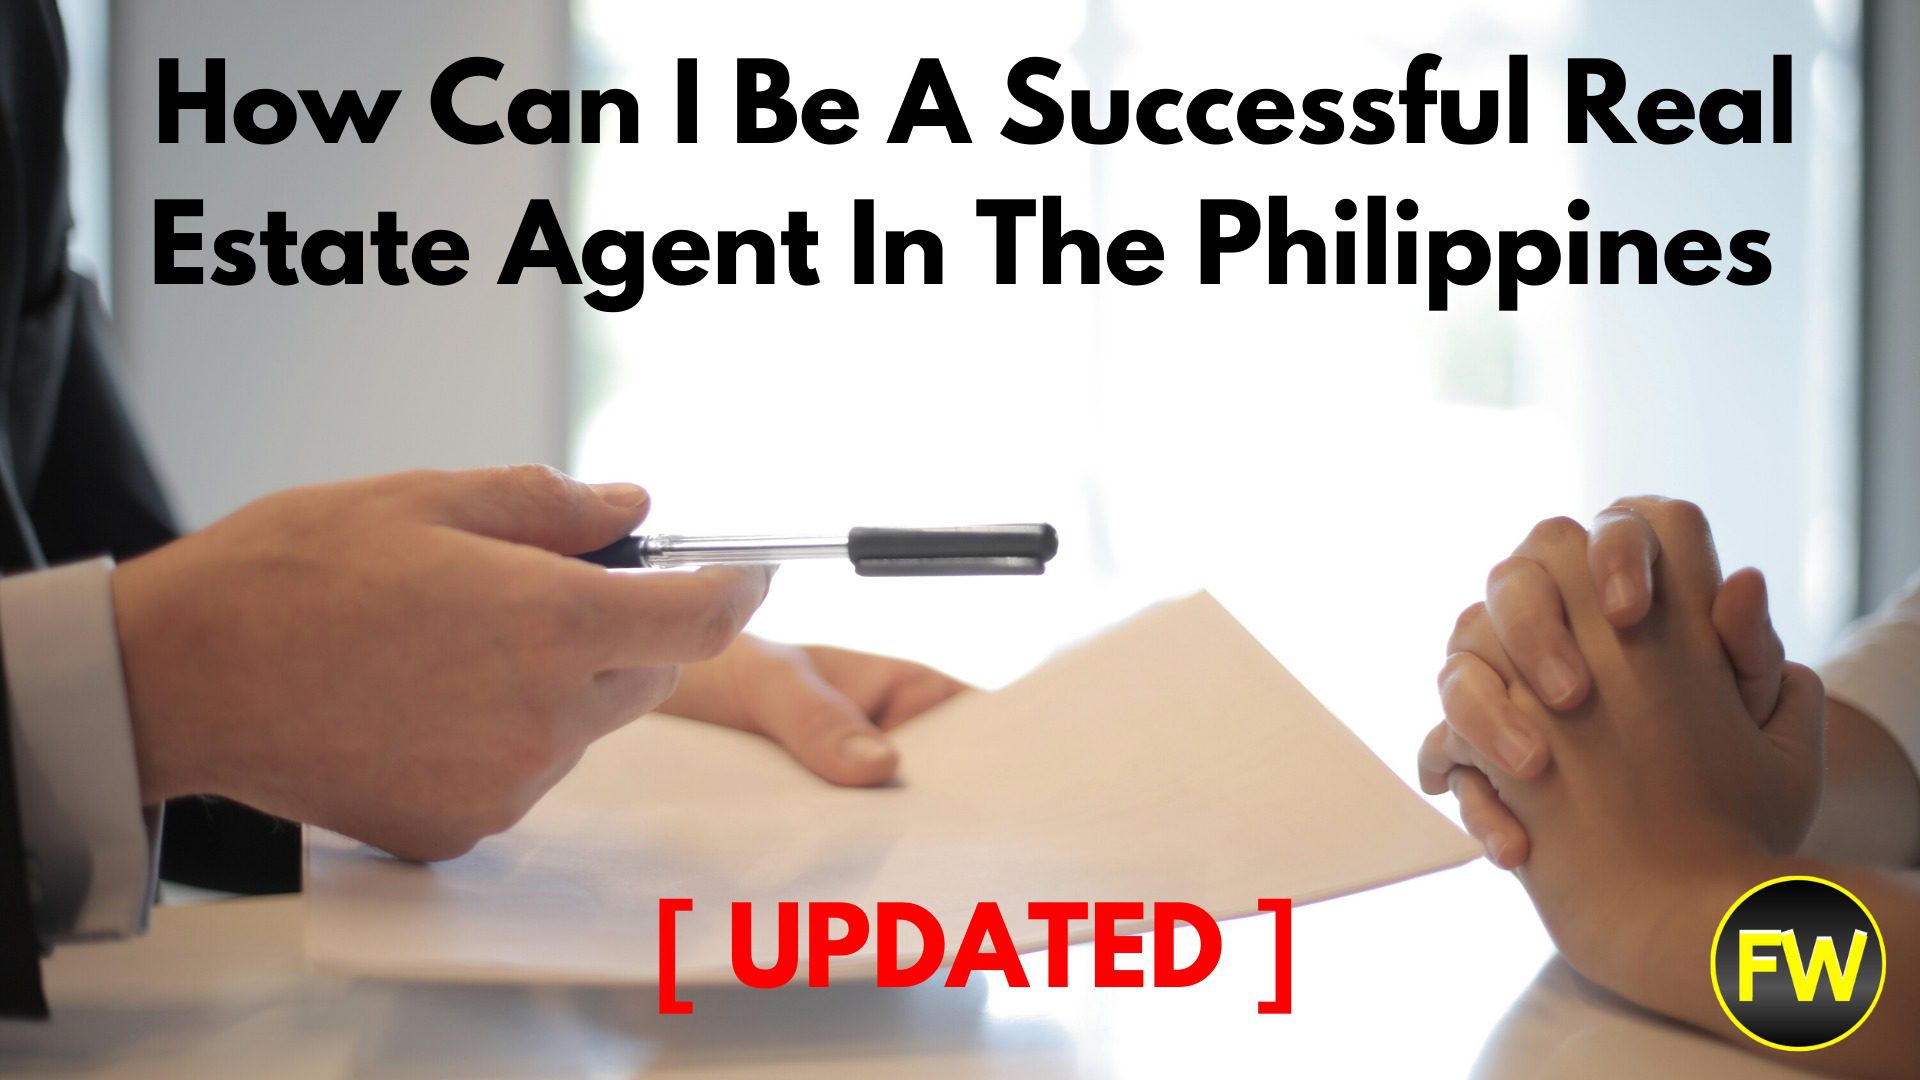 How can I be a successful real estate agent in the Philippines